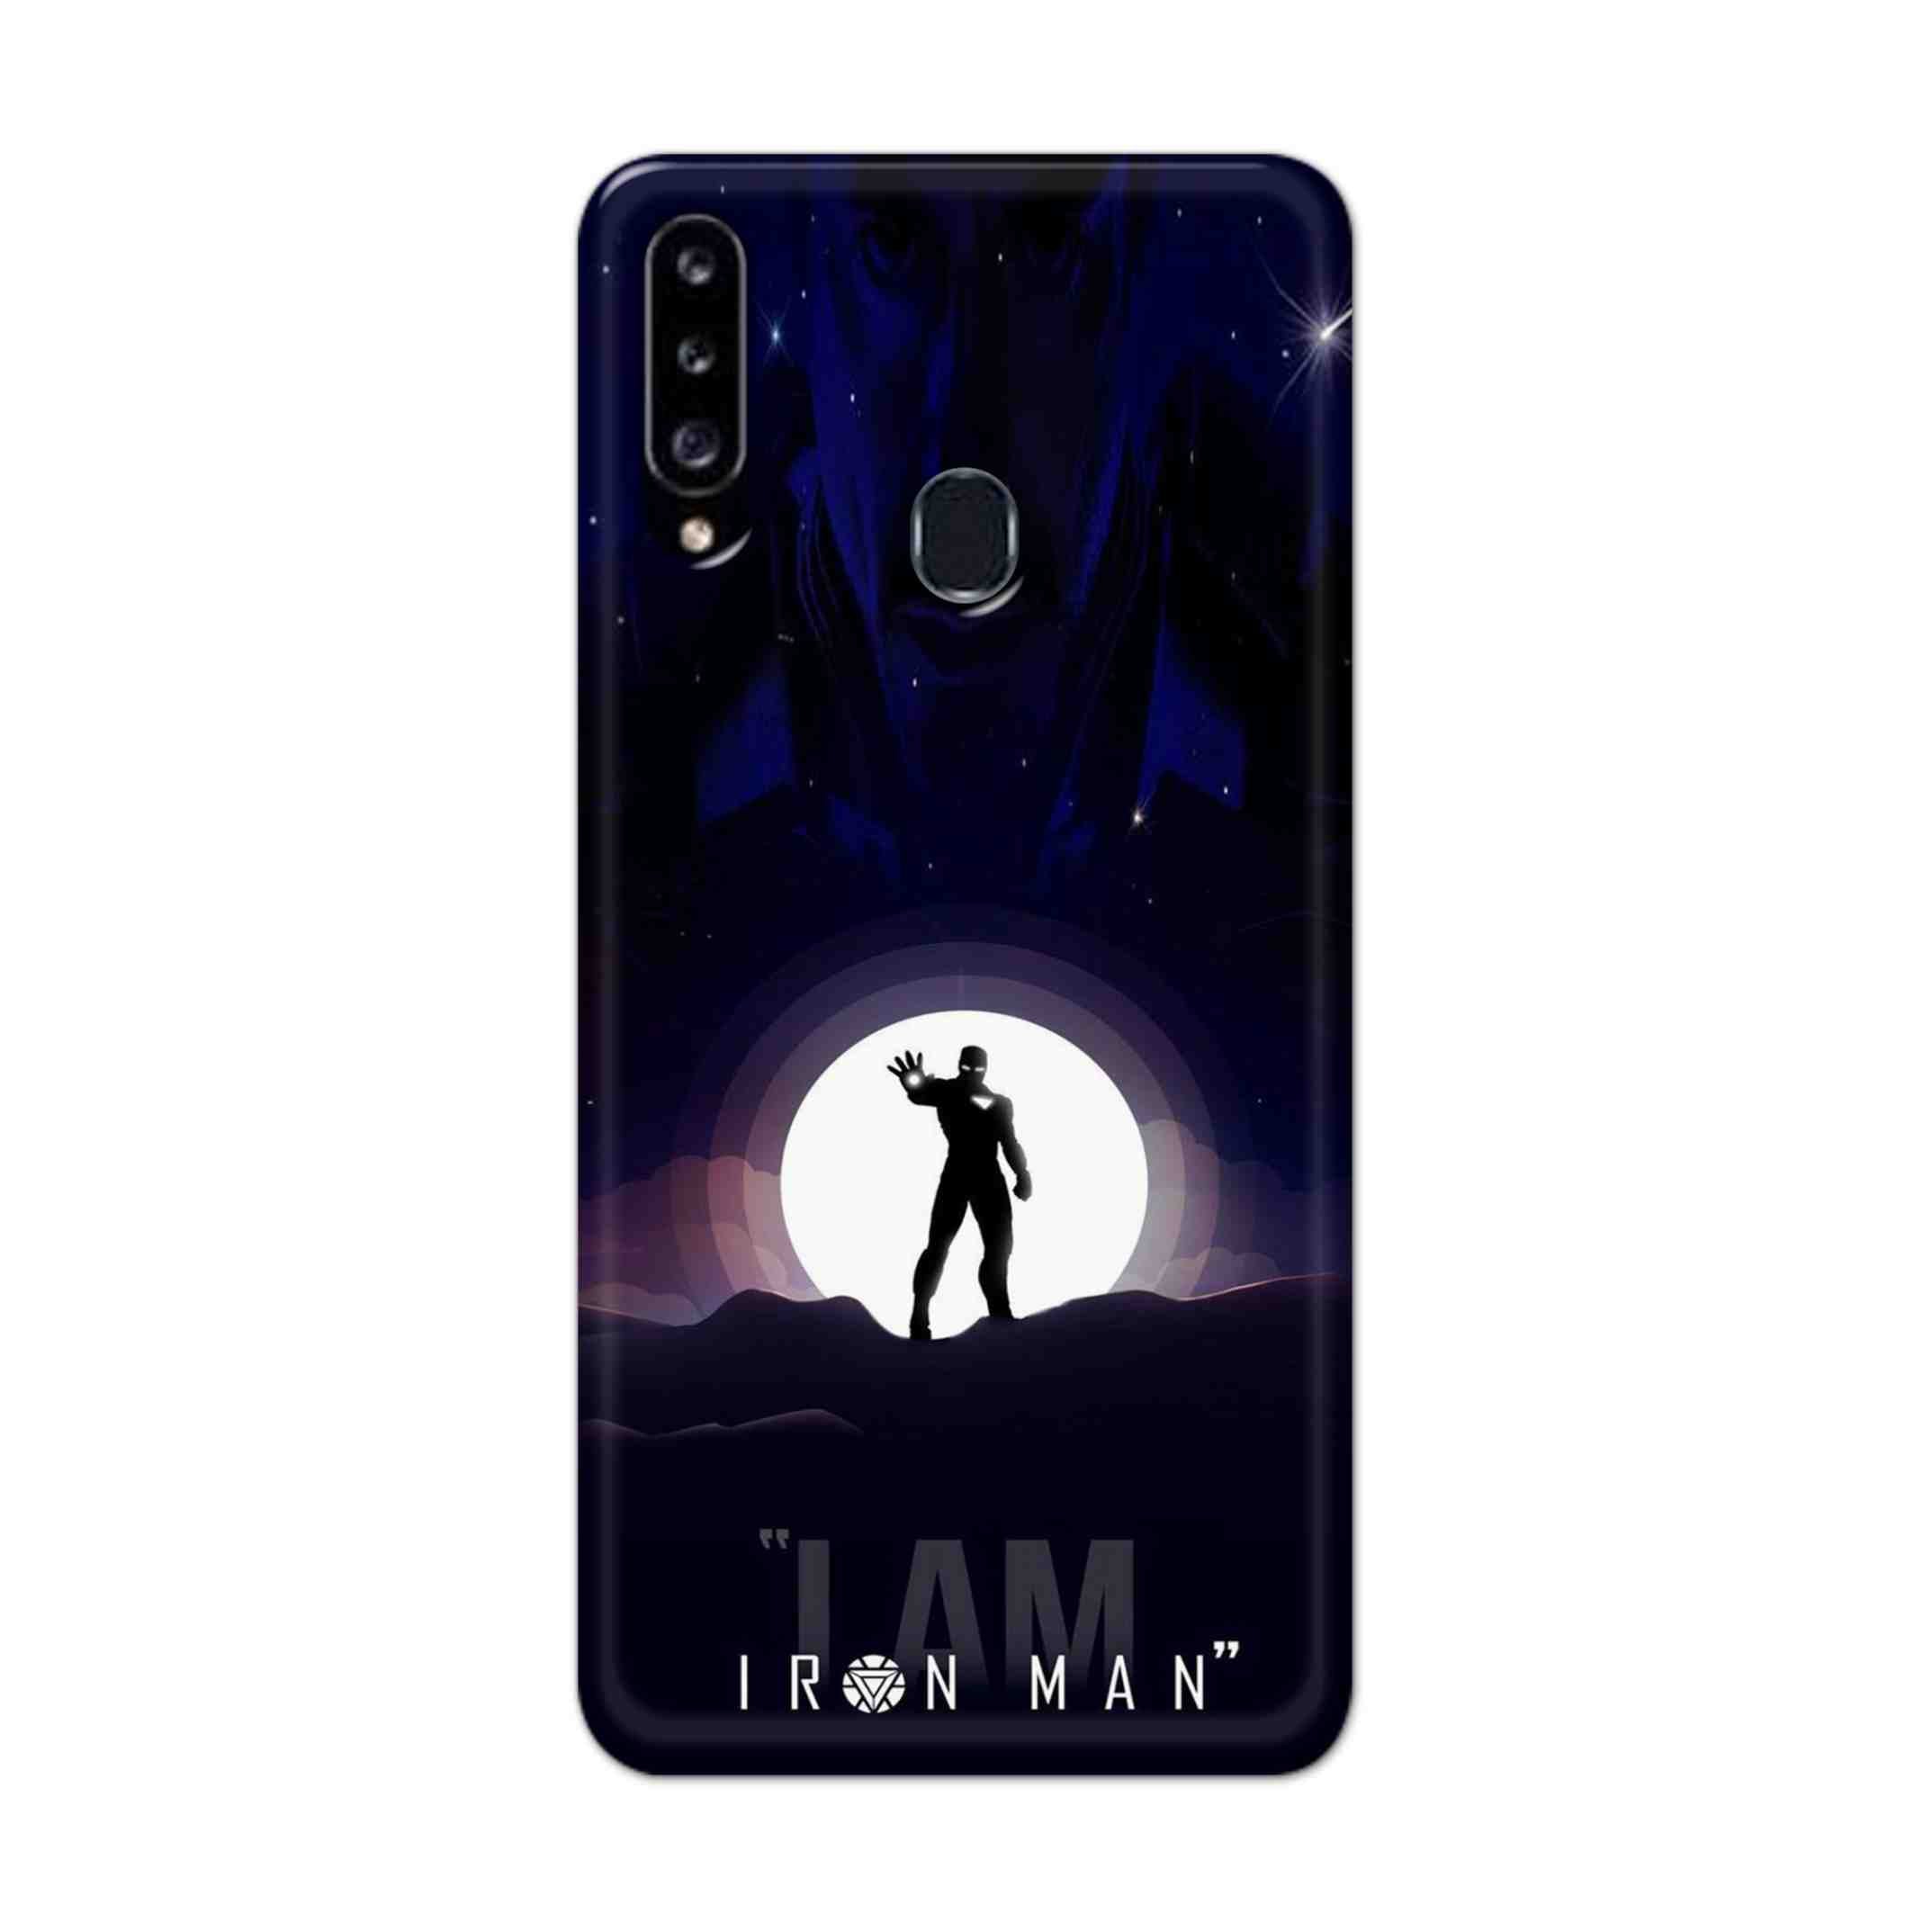 Buy I Am Iron Man Hard Back Mobile Phone Case Cover For Samsung Galaxy A21 Online